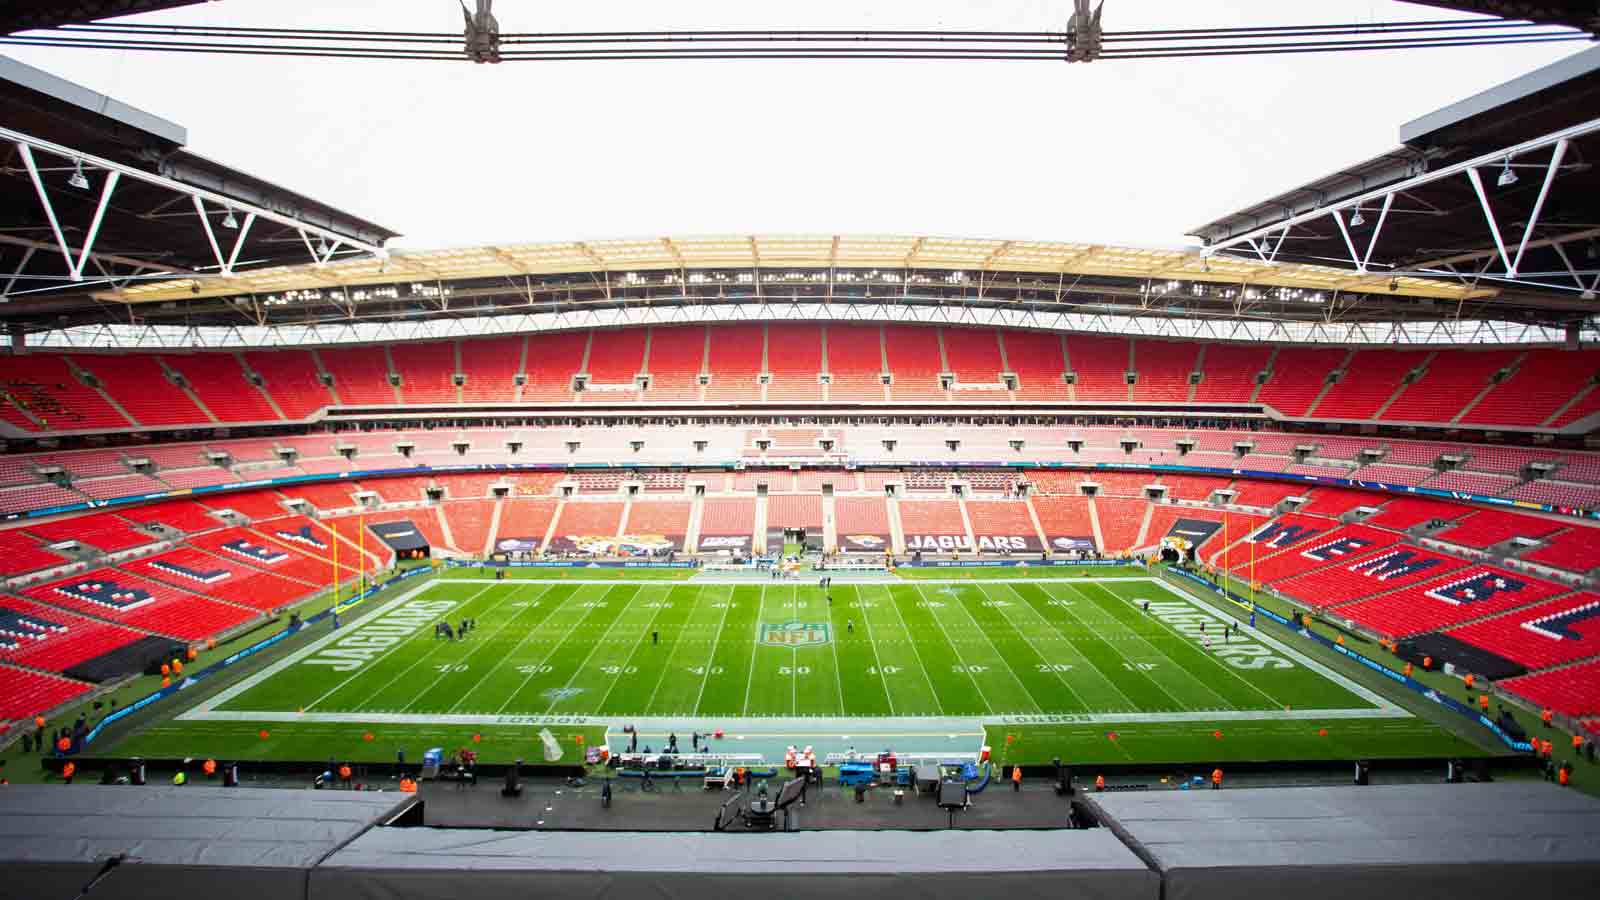 Falcons vs. Jaguars: How to Watch the Week 4 NFL Game in London